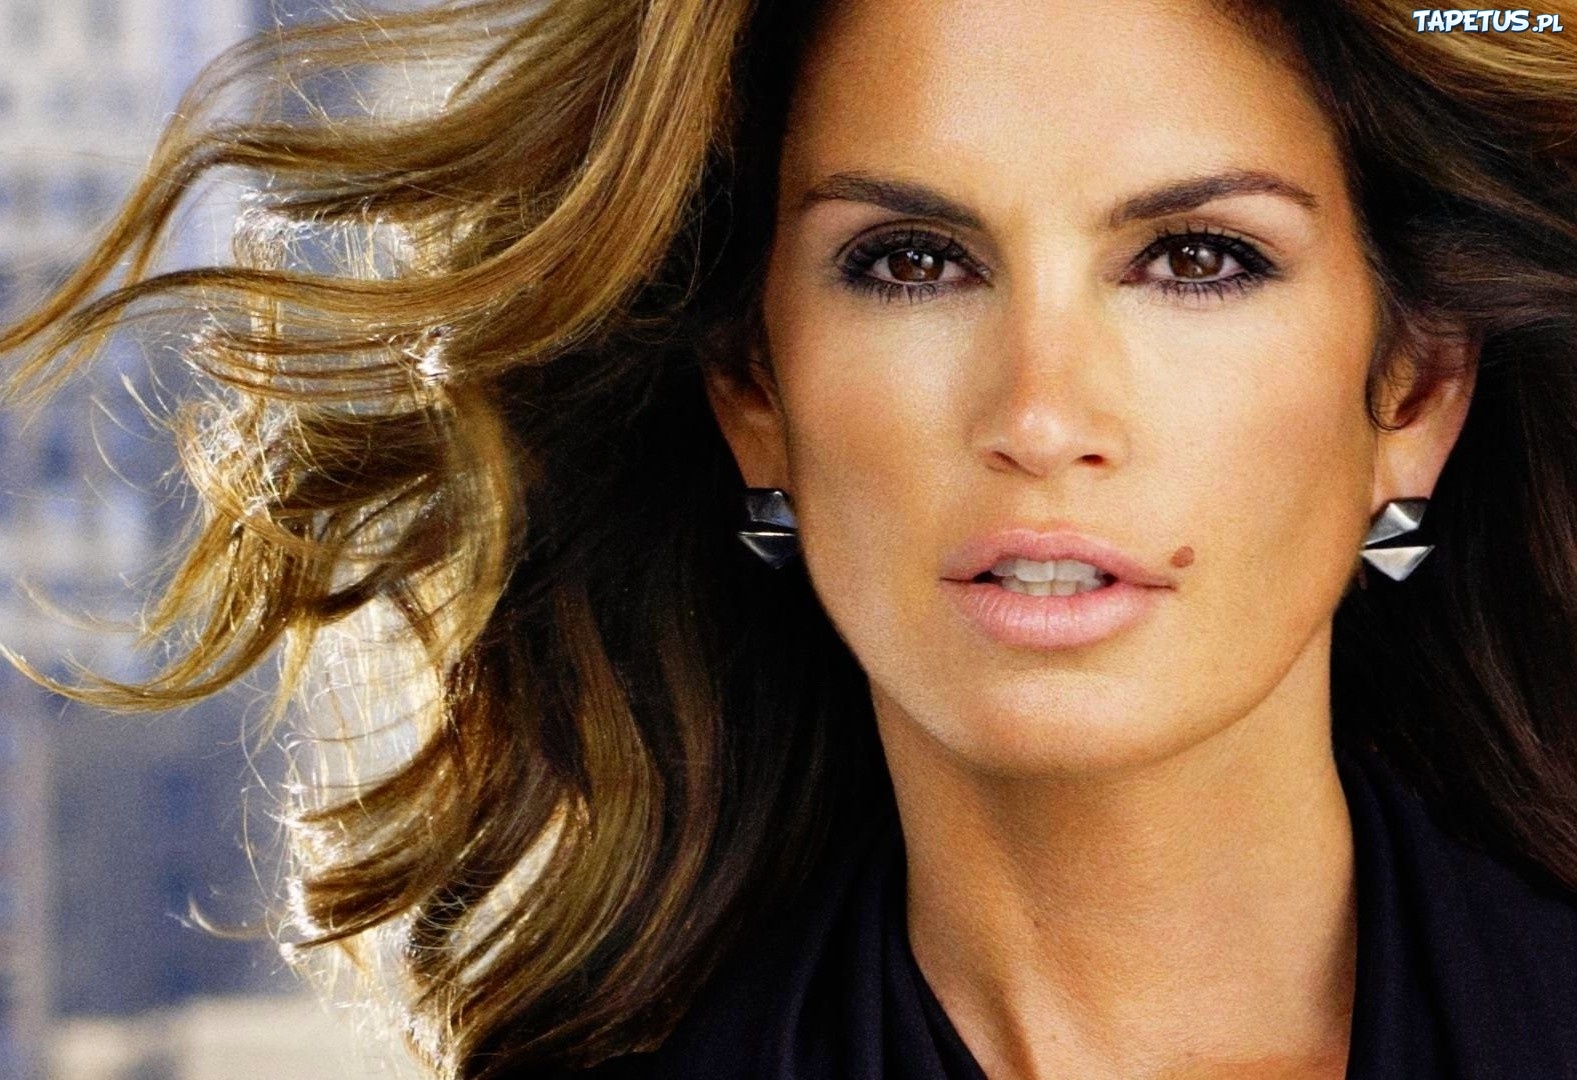 Pictures of Cindy Crawford - Pictures Of Celebrities